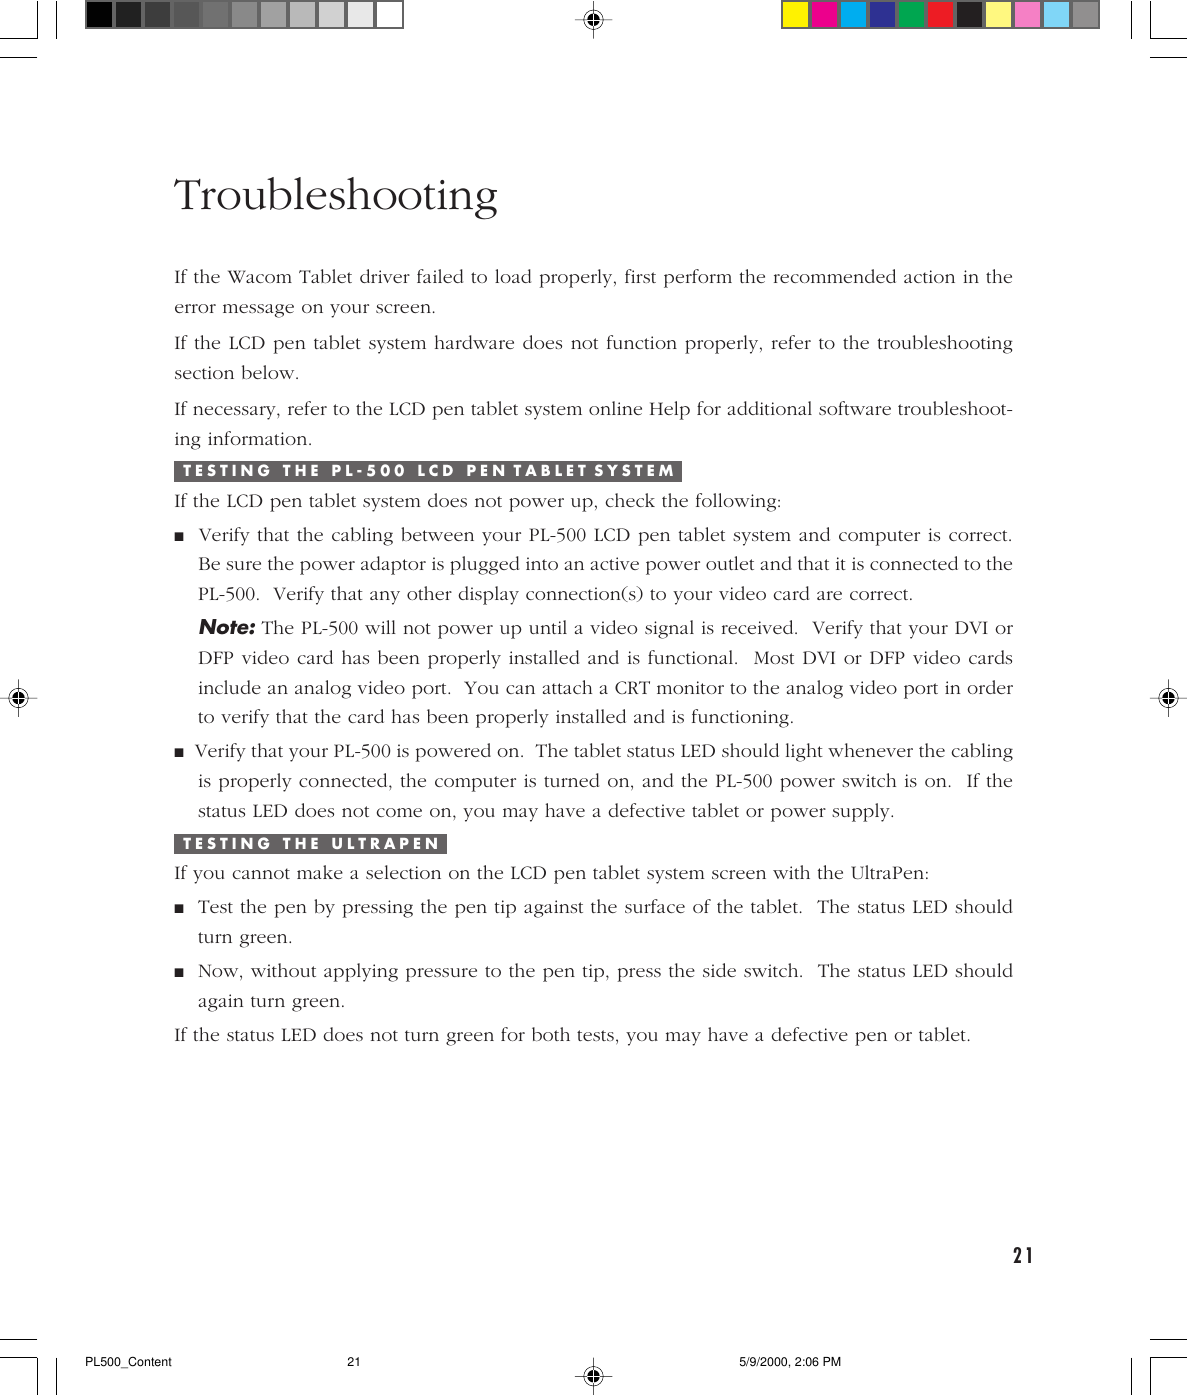 21TroubleshootingIf the Wacom Tablet driver failed to load properly, first perform the recommended action in theerror message on your screen.If the LCD pen tablet system hardware does not function properly, refer to the troubleshootingsection below.If necessary, refer to the LCD pen tablet system online Help for additional software troubleshoot-ing information.T E S T I N G   T H E   P L - 5 0 0   L C D   P E N  T A B L E T  S Y S T E MIf the LCD pen tablet system does not power up, check the following:■  Verify that the cabling between your PL-500 LCD pen tablet system and computer is correct.Be sure the power adaptor is plugged into an active power outlet and that it is connected to thePL-500.  Verify that any other display connection(s) to your video card are correct.Note: The PL-500 will not power up until a video signal is received.  Verify that your DVI orDFP video card has been properly installed and is functional.  Most DVI or DFP video cardsinclude an analog video port.  You can attach a CRT monitor to the analog video port in orderto verify that the card has been properly installed and is functioning.■  Verify that your PL-500 is powered on.  The tablet status LED should light whenever the cablingis properly connected, the computer is turned on, and the PL-500 power switch is on.  If thestatus LED does not come on, you may have a defective tablet or power supply.T E S T I N G   T H E   U L T R A P E NIf you cannot make a selection on the LCD pen tablet system screen with the UltraPen:■Test the pen by pressing the pen tip against the surface of the tablet.  The status LED shouldturn green.■Now, without applying pressure to the pen tip, press the side switch.  The status LED shouldagain turn green.If the status LED does not turn green for both tests, you may have a defective pen or tablet.PL500_Content 5/9/2000, 2:06 PM21